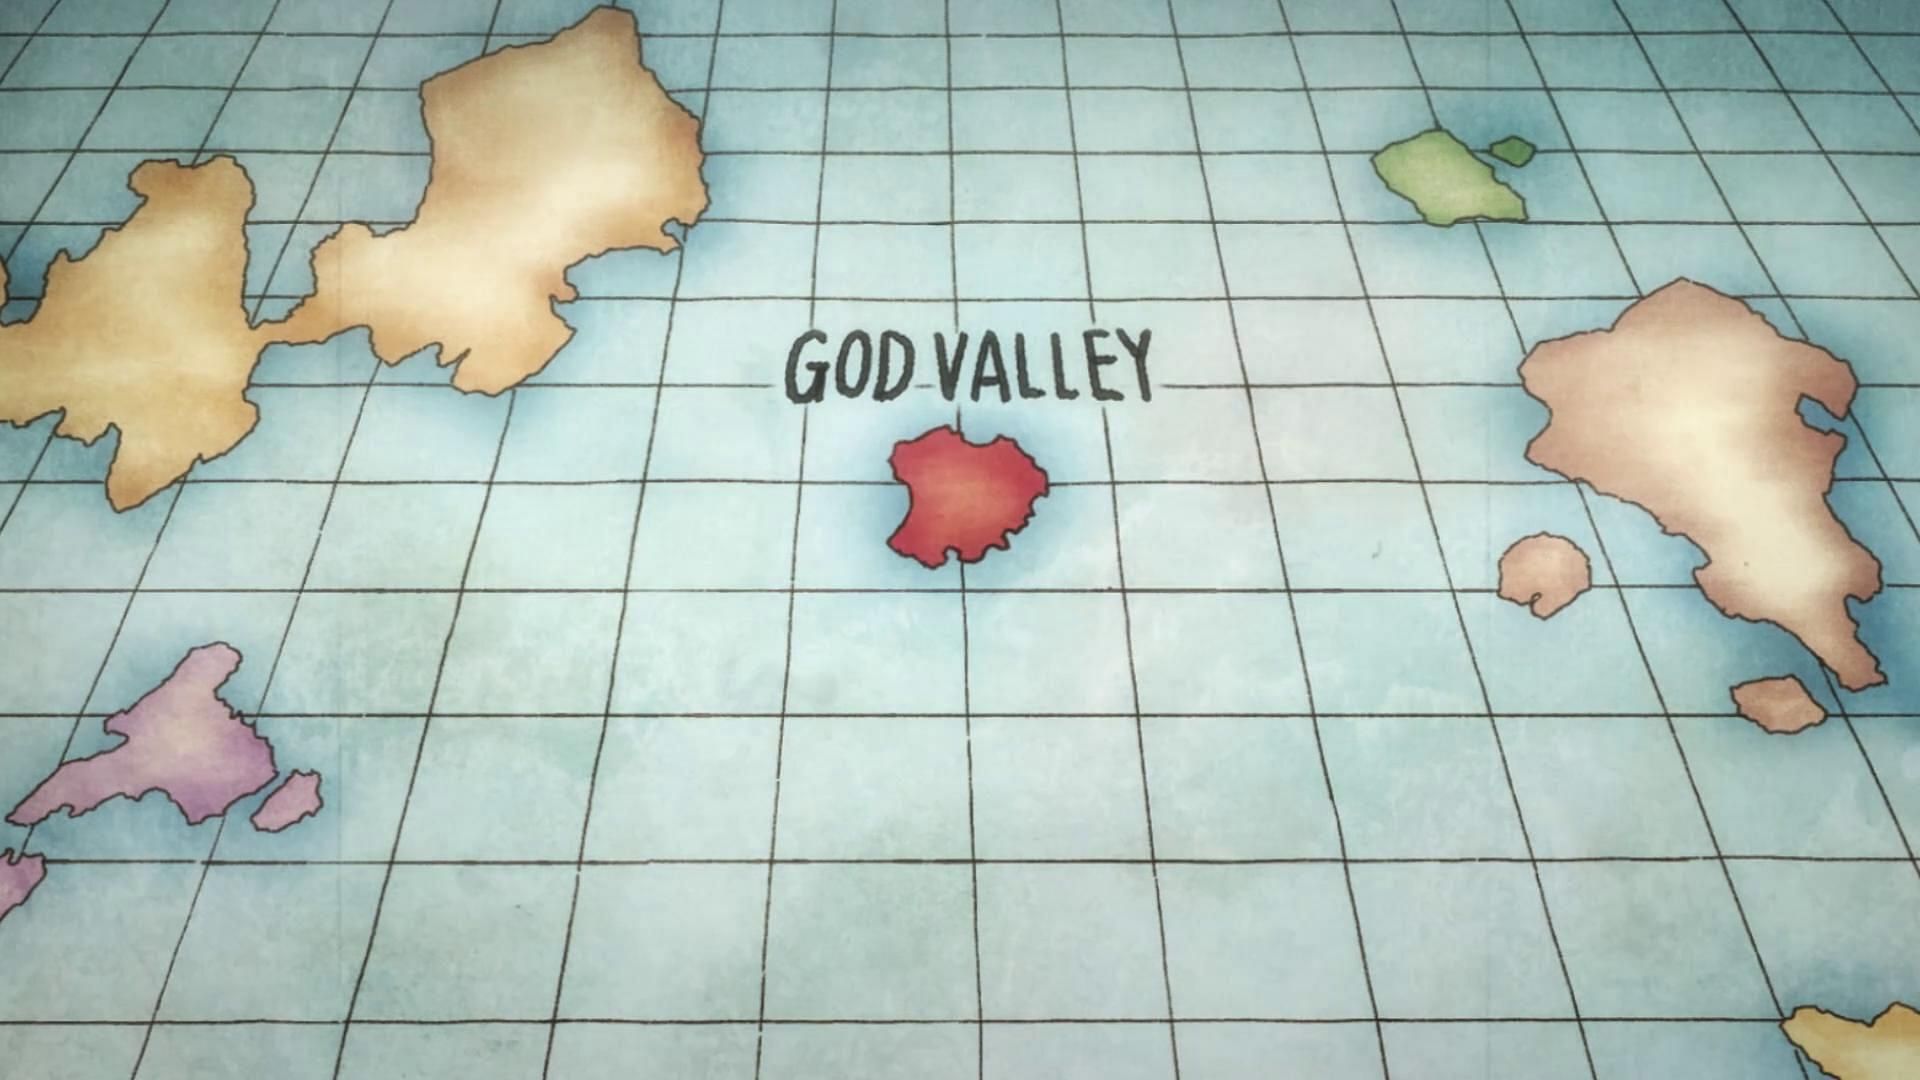 The nobles planned to kill 100,000 people in God Valley (Image via Toei Animation, One Piece)